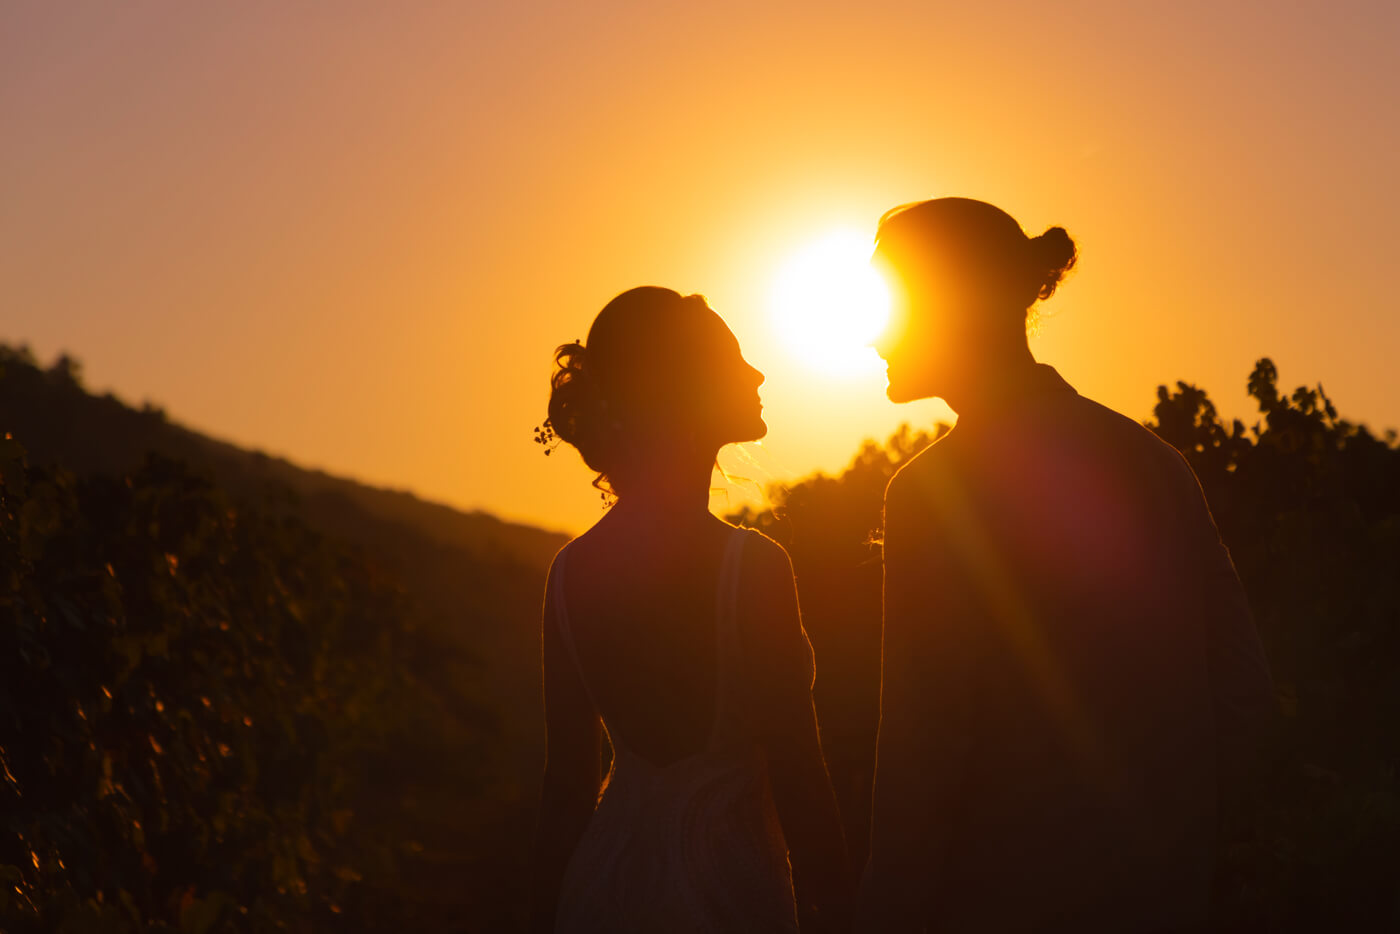 Sunset Romance: A Silhouette of Love – Engagement Session Capturing the Magic of the Golden Hour.